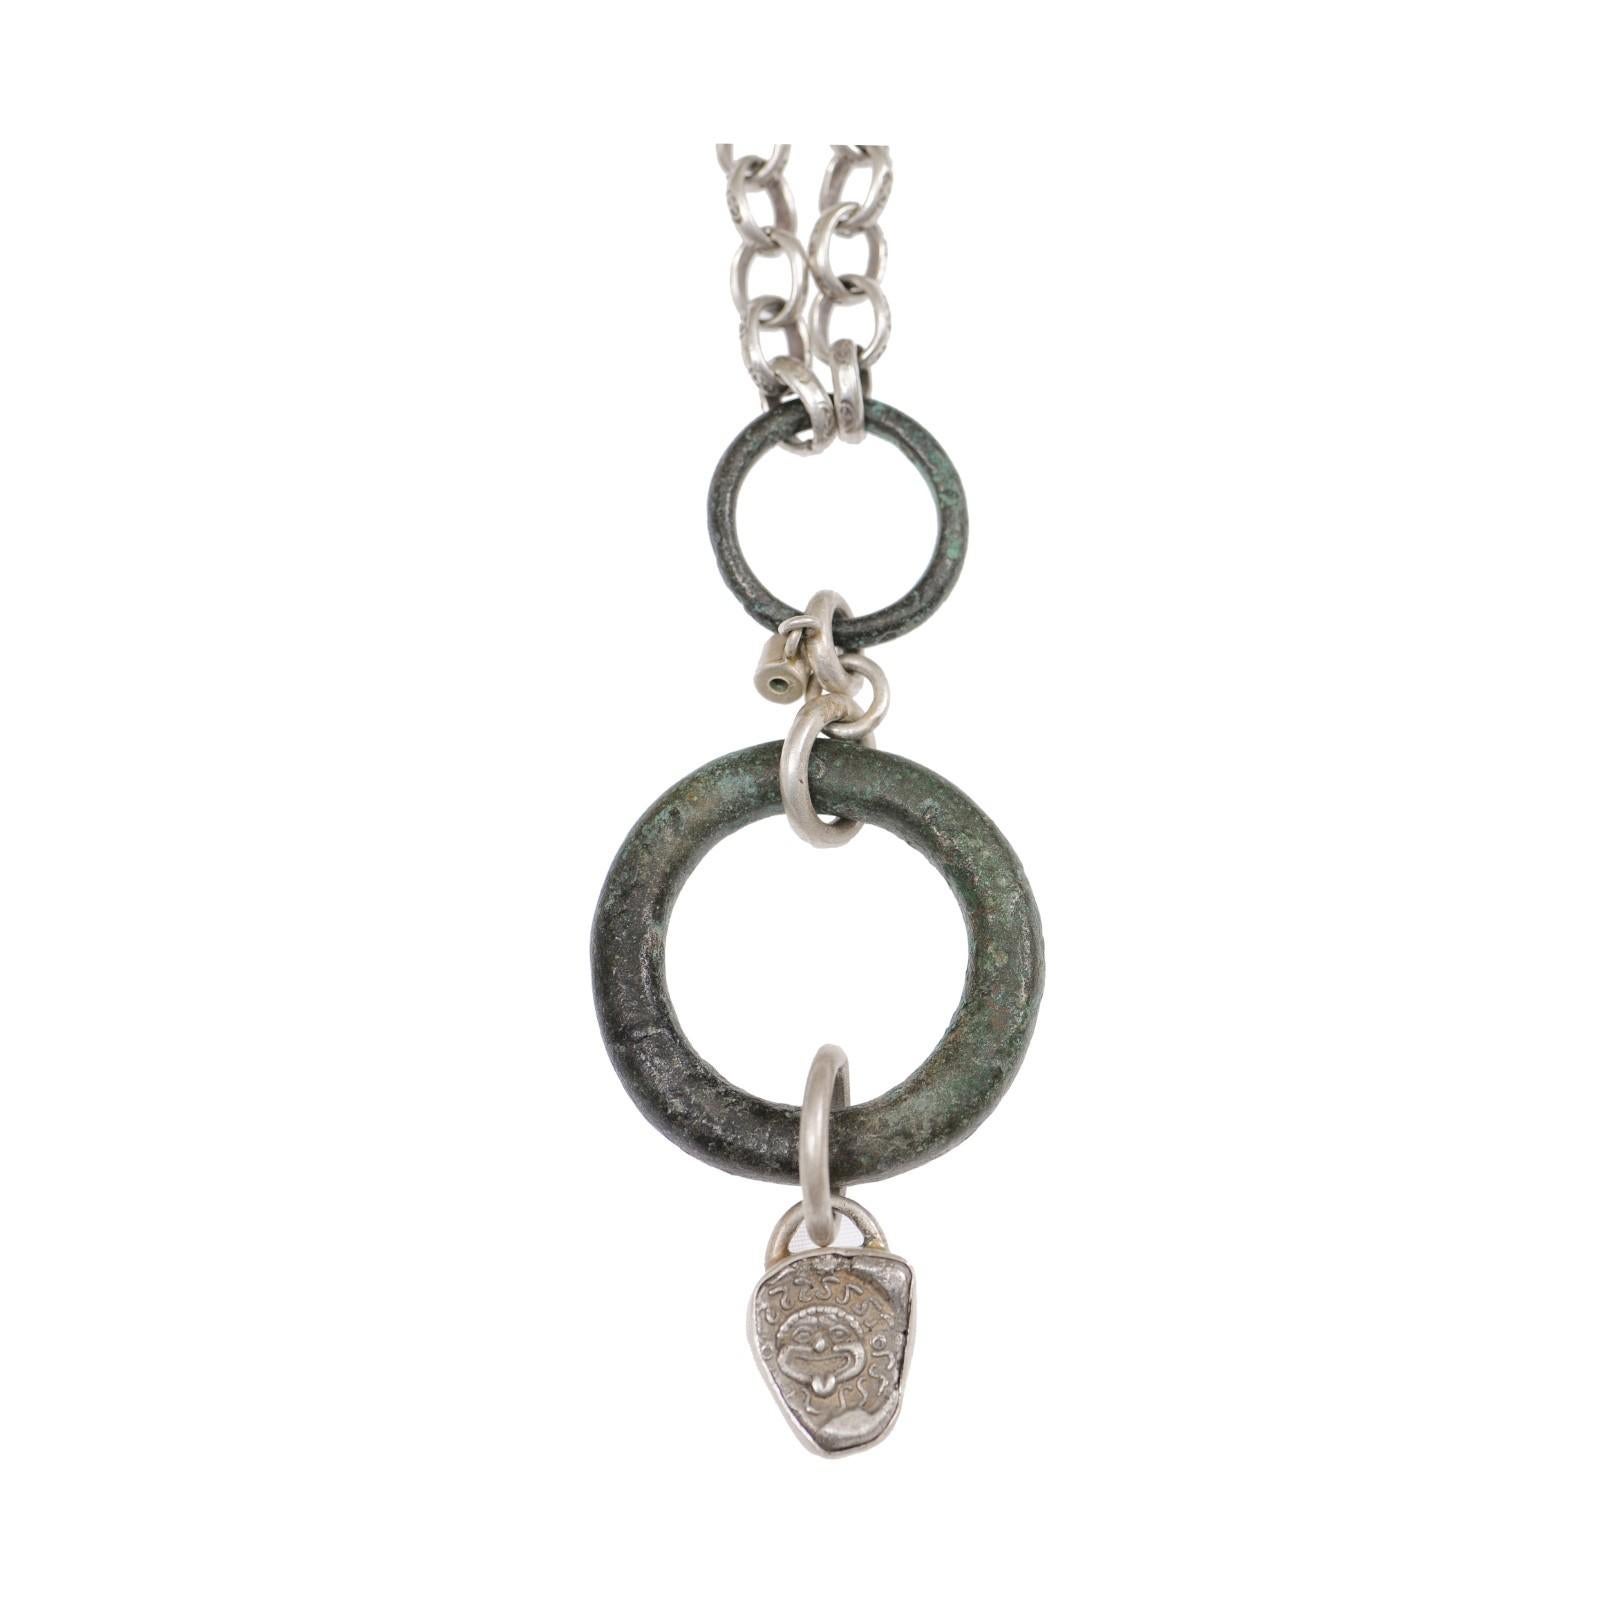 Tiered Pendant in bronze, w/emerald and drachm (coin) on Sterling Silver Chain For Sale 5